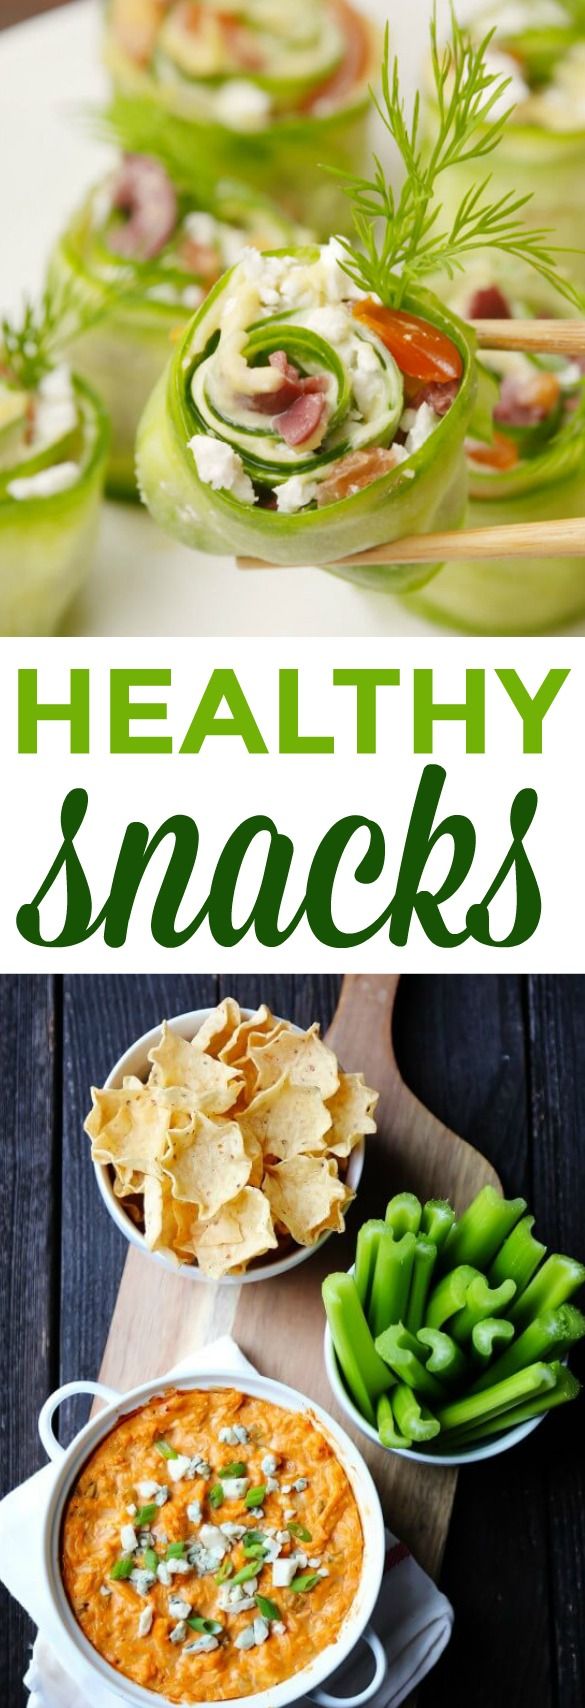 Today I want to show you this great roundup full of yummy Healthy Snacks that y...